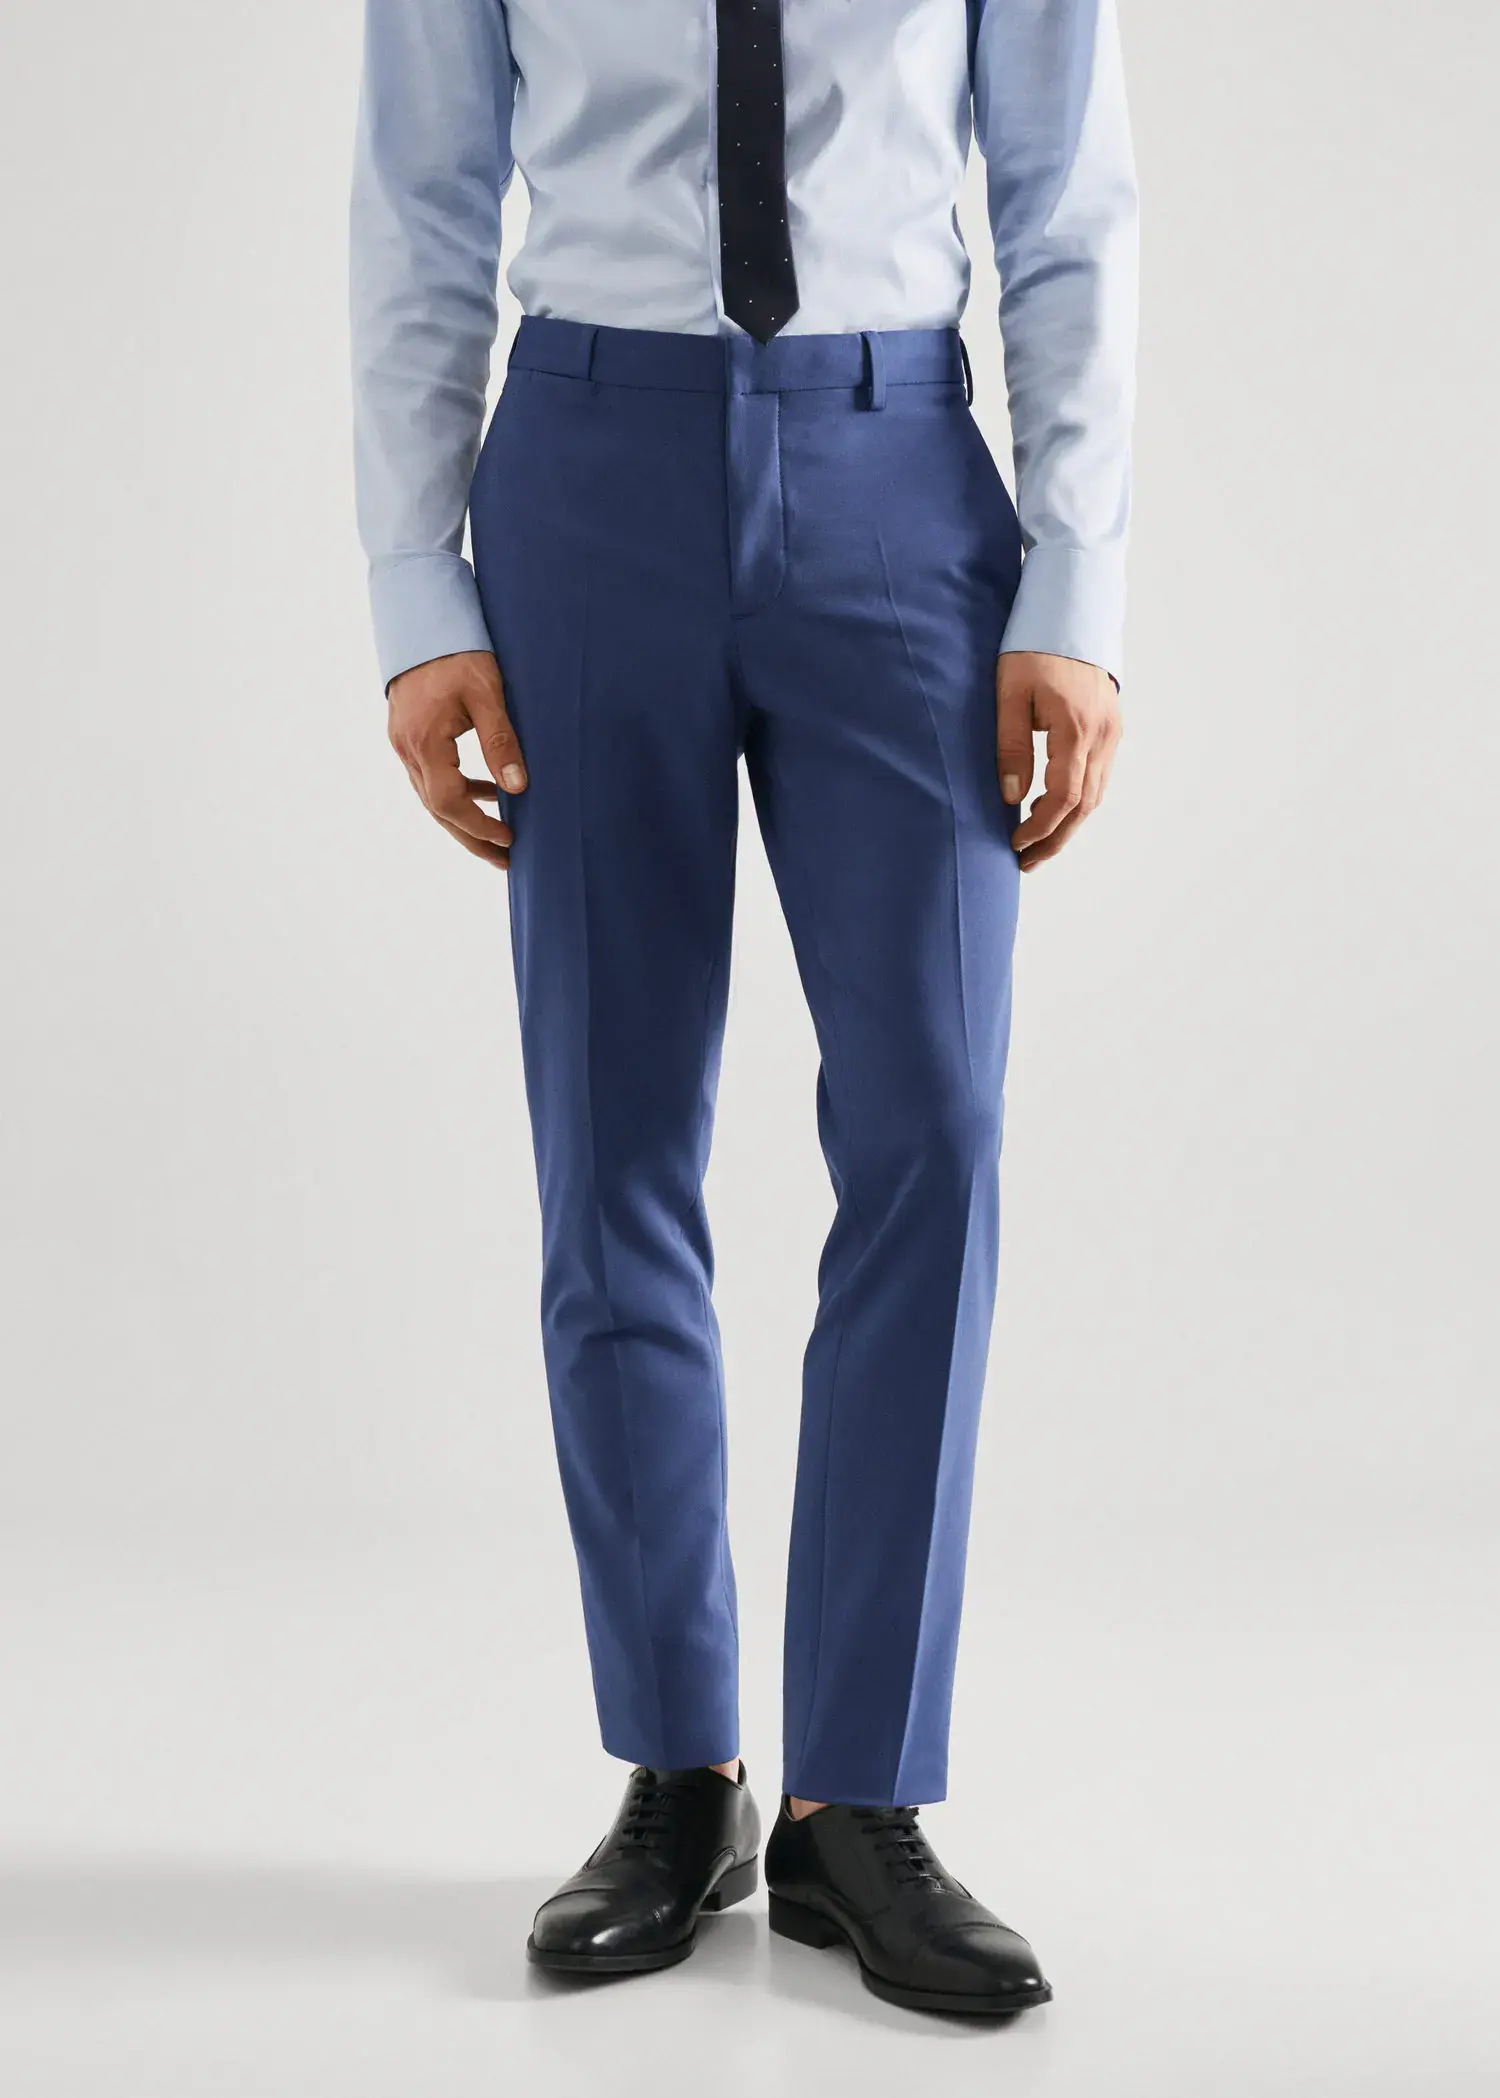 Mango Stretch fabric super slim-fit suit pants. a man wearing a blue suit standing in front of a white wall. 